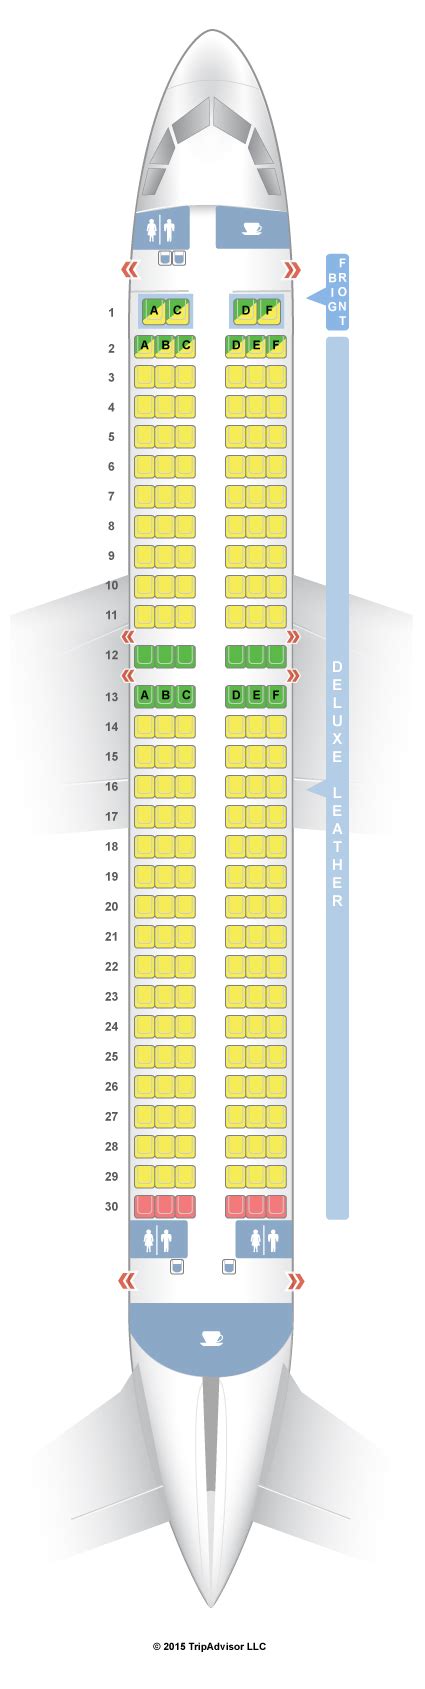 Learn about the Spirit Airbus A320 seating arrangement, classes, di